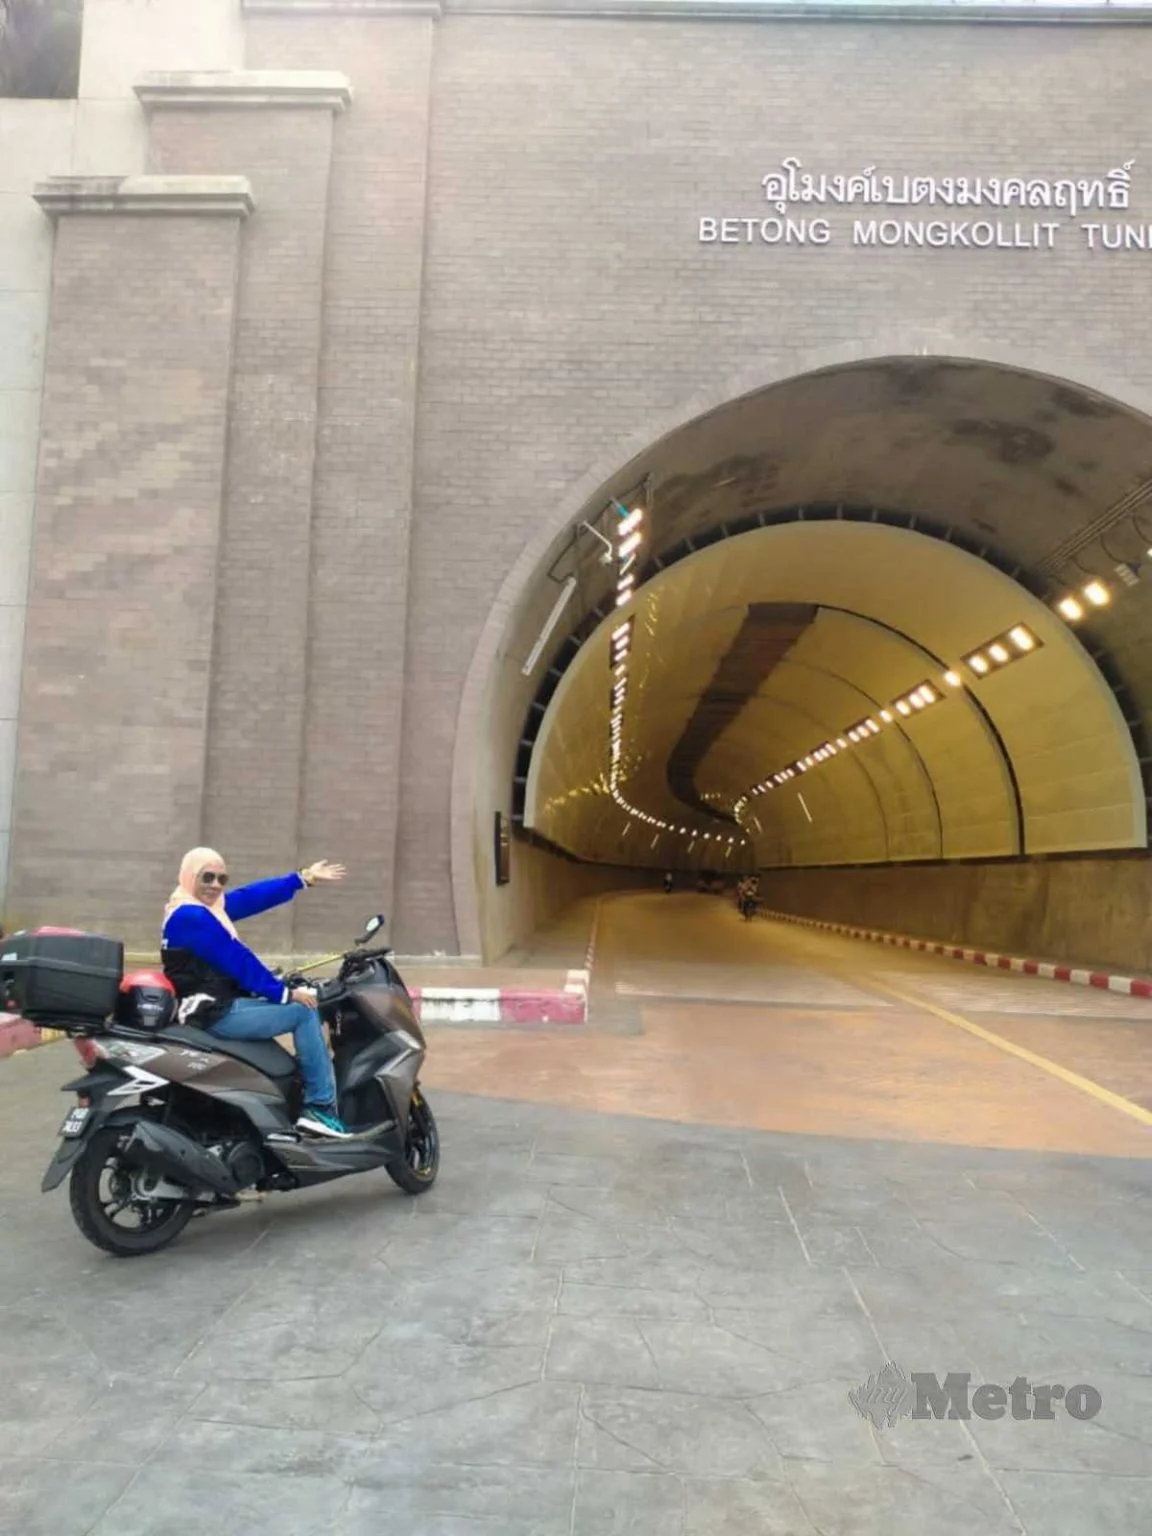 Taking photo at tunnel entrance